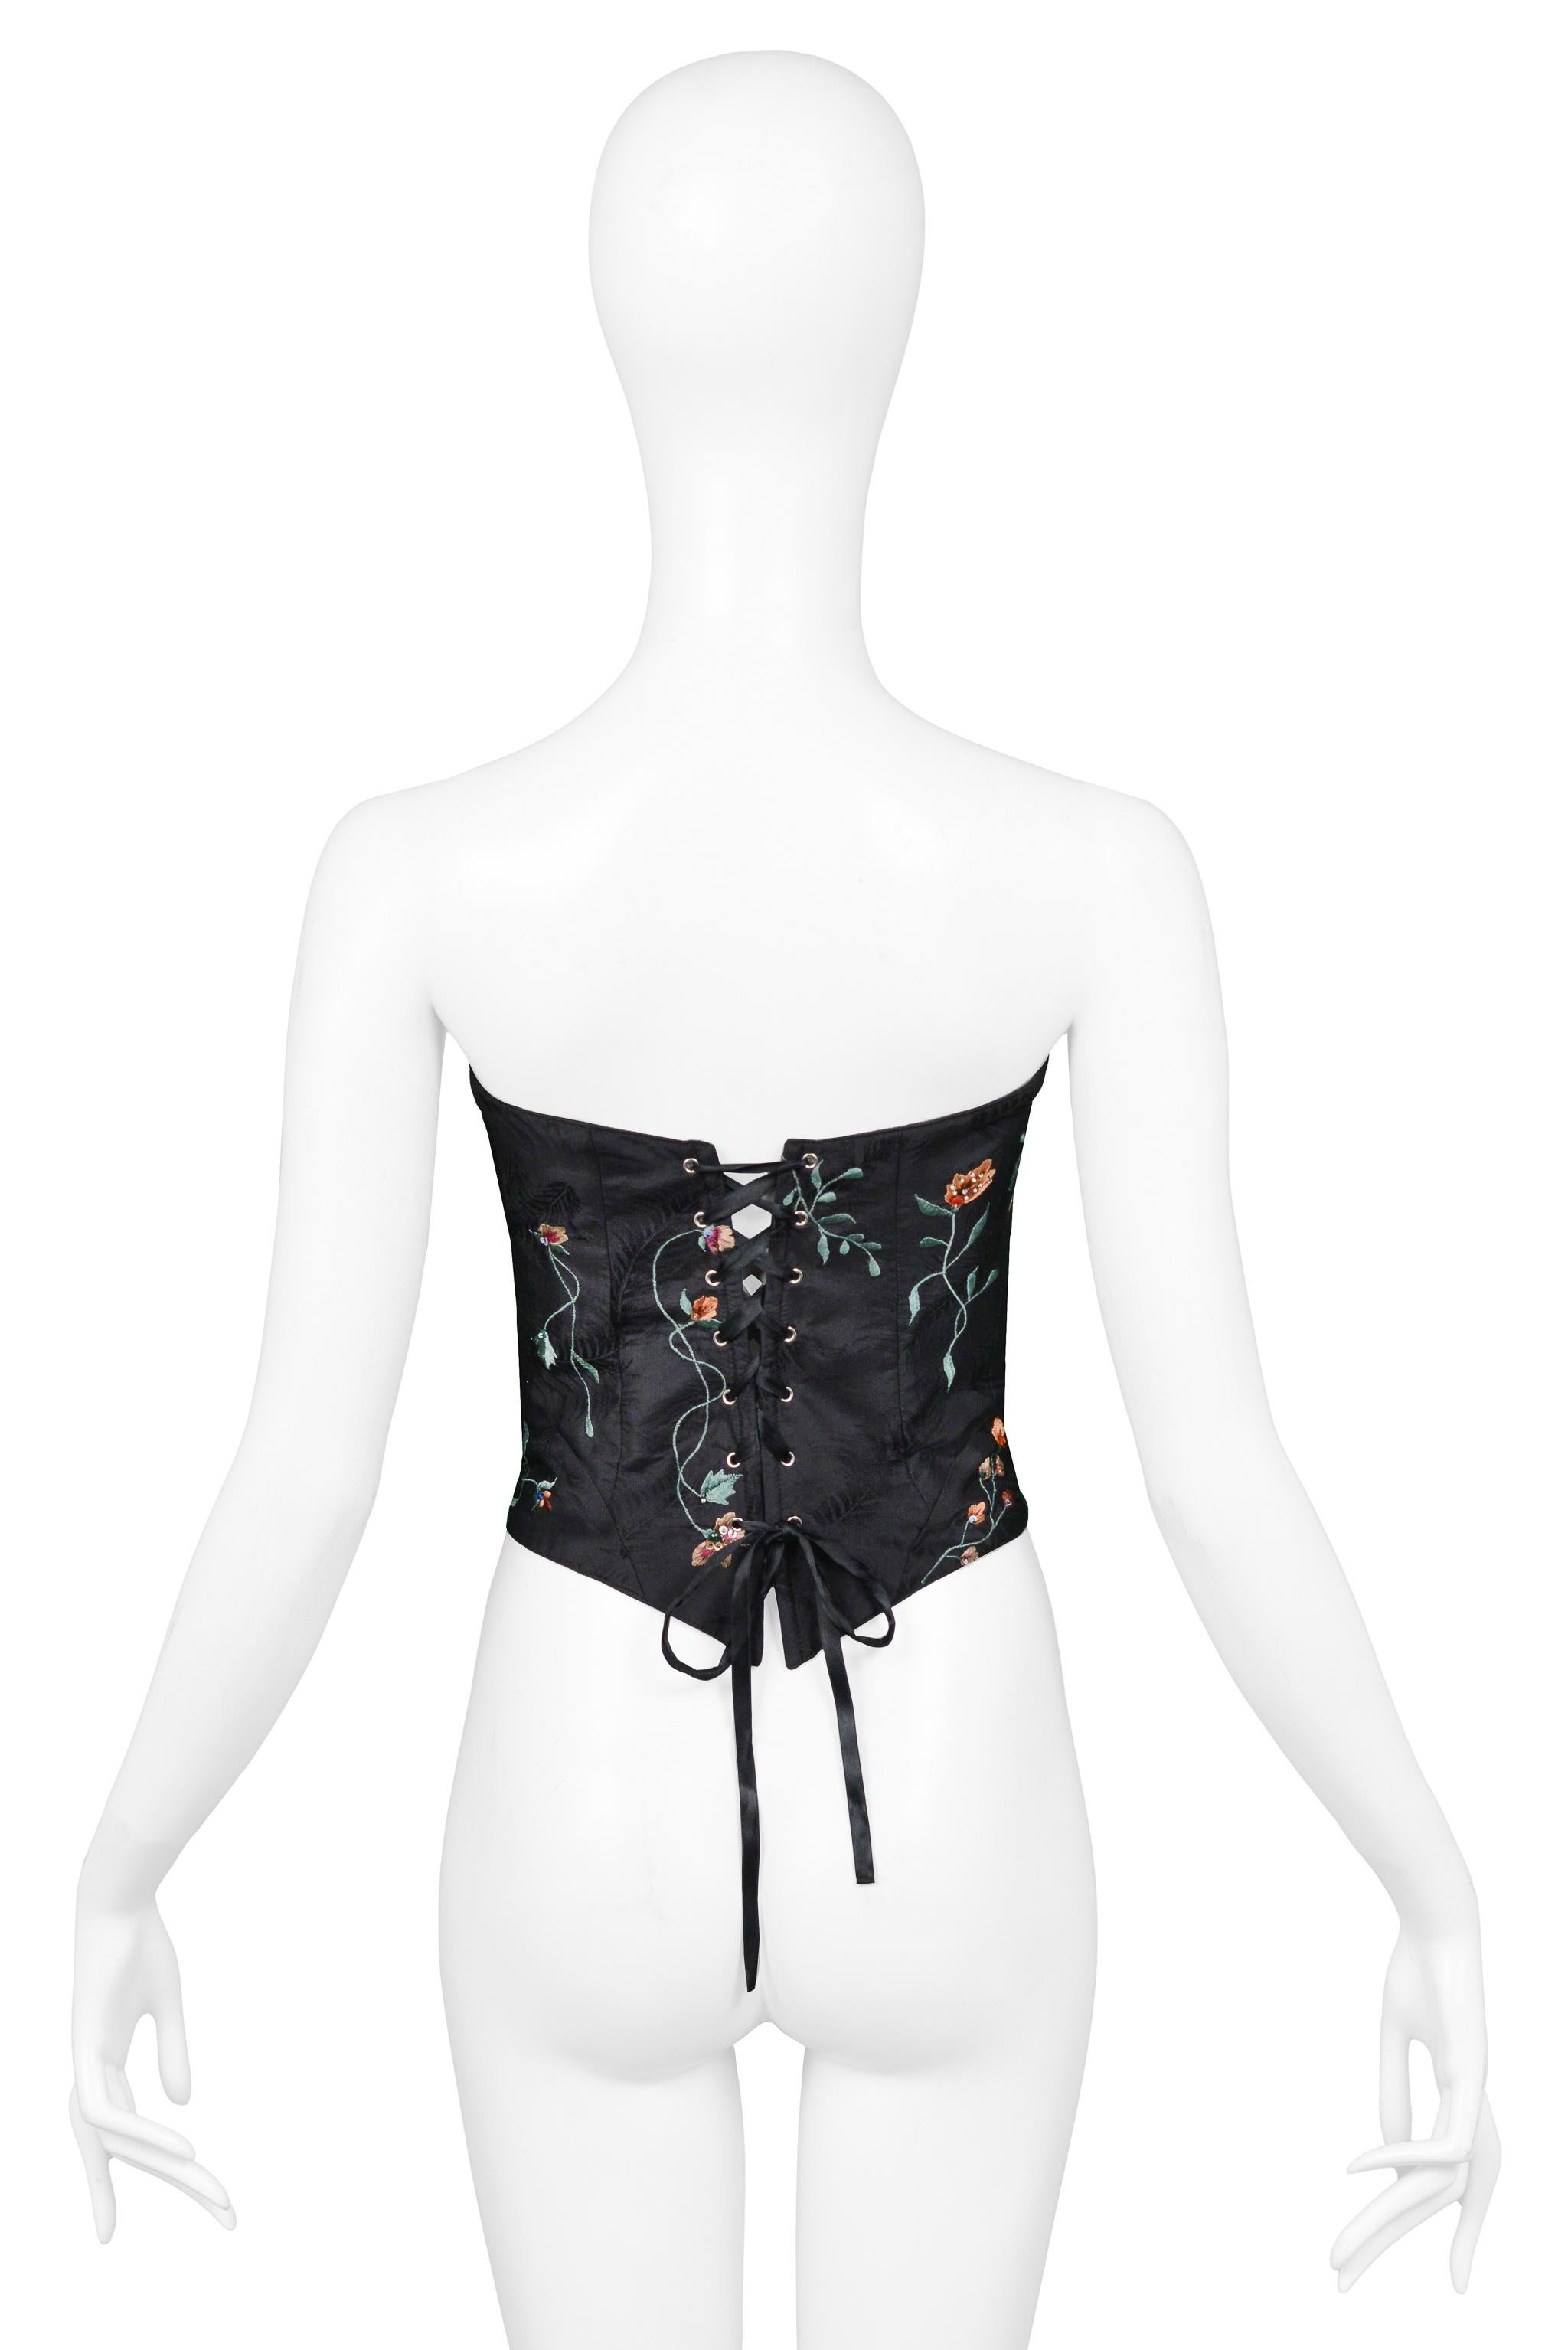 Gray Lolita Lempicka Floral Embroidered Bustier 2000 For Sale